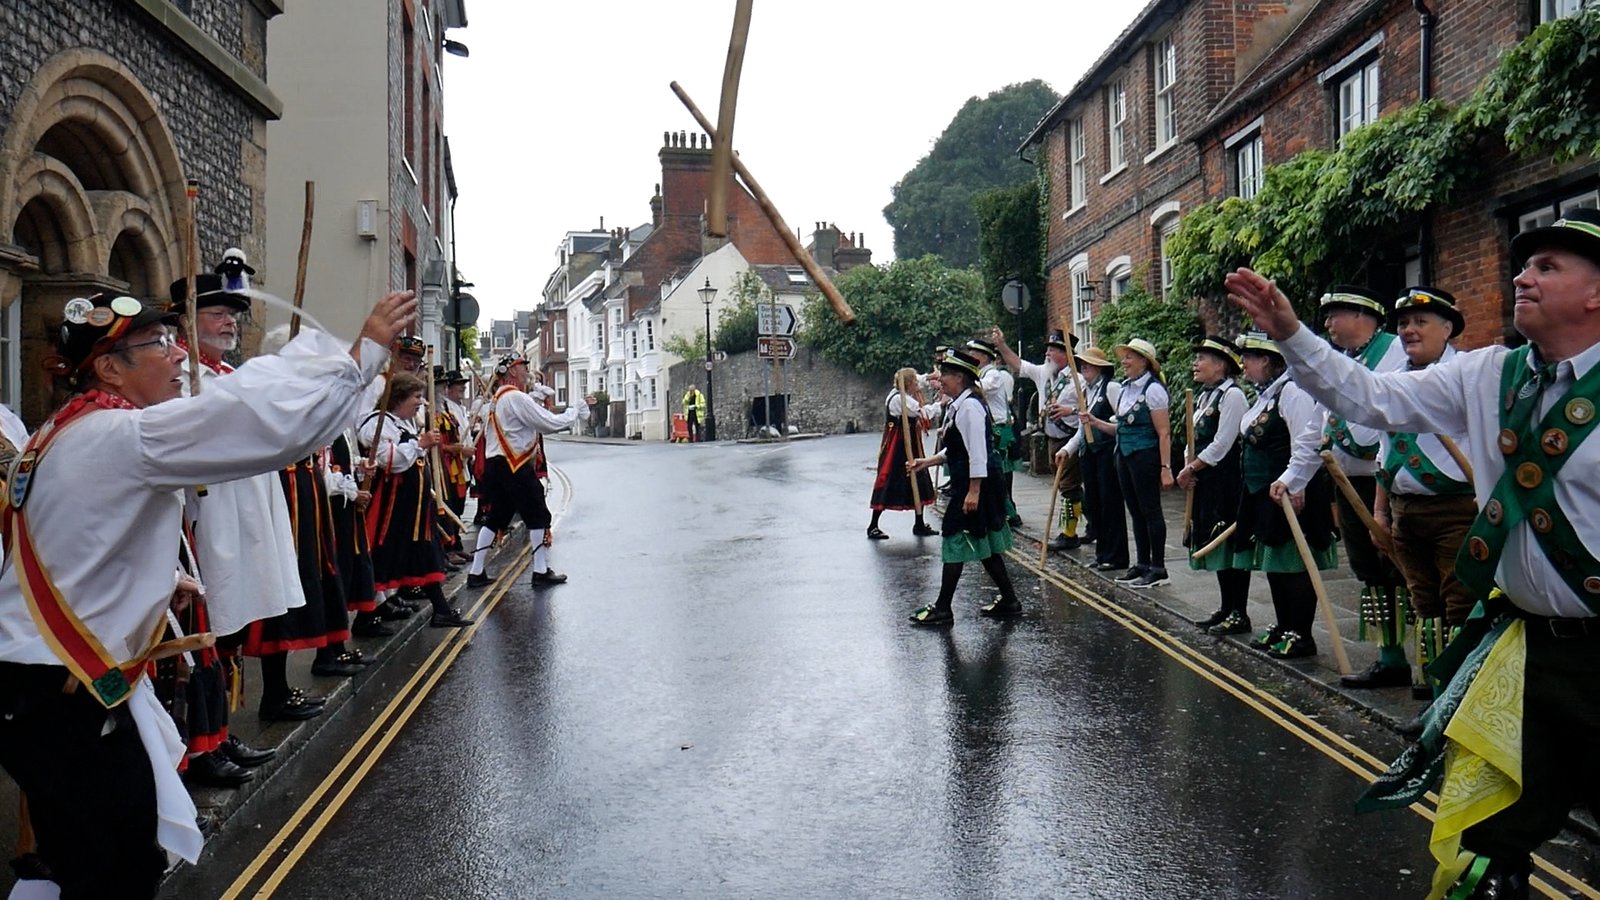 This is no ordinary Morris side… This is Sompting Village Morris